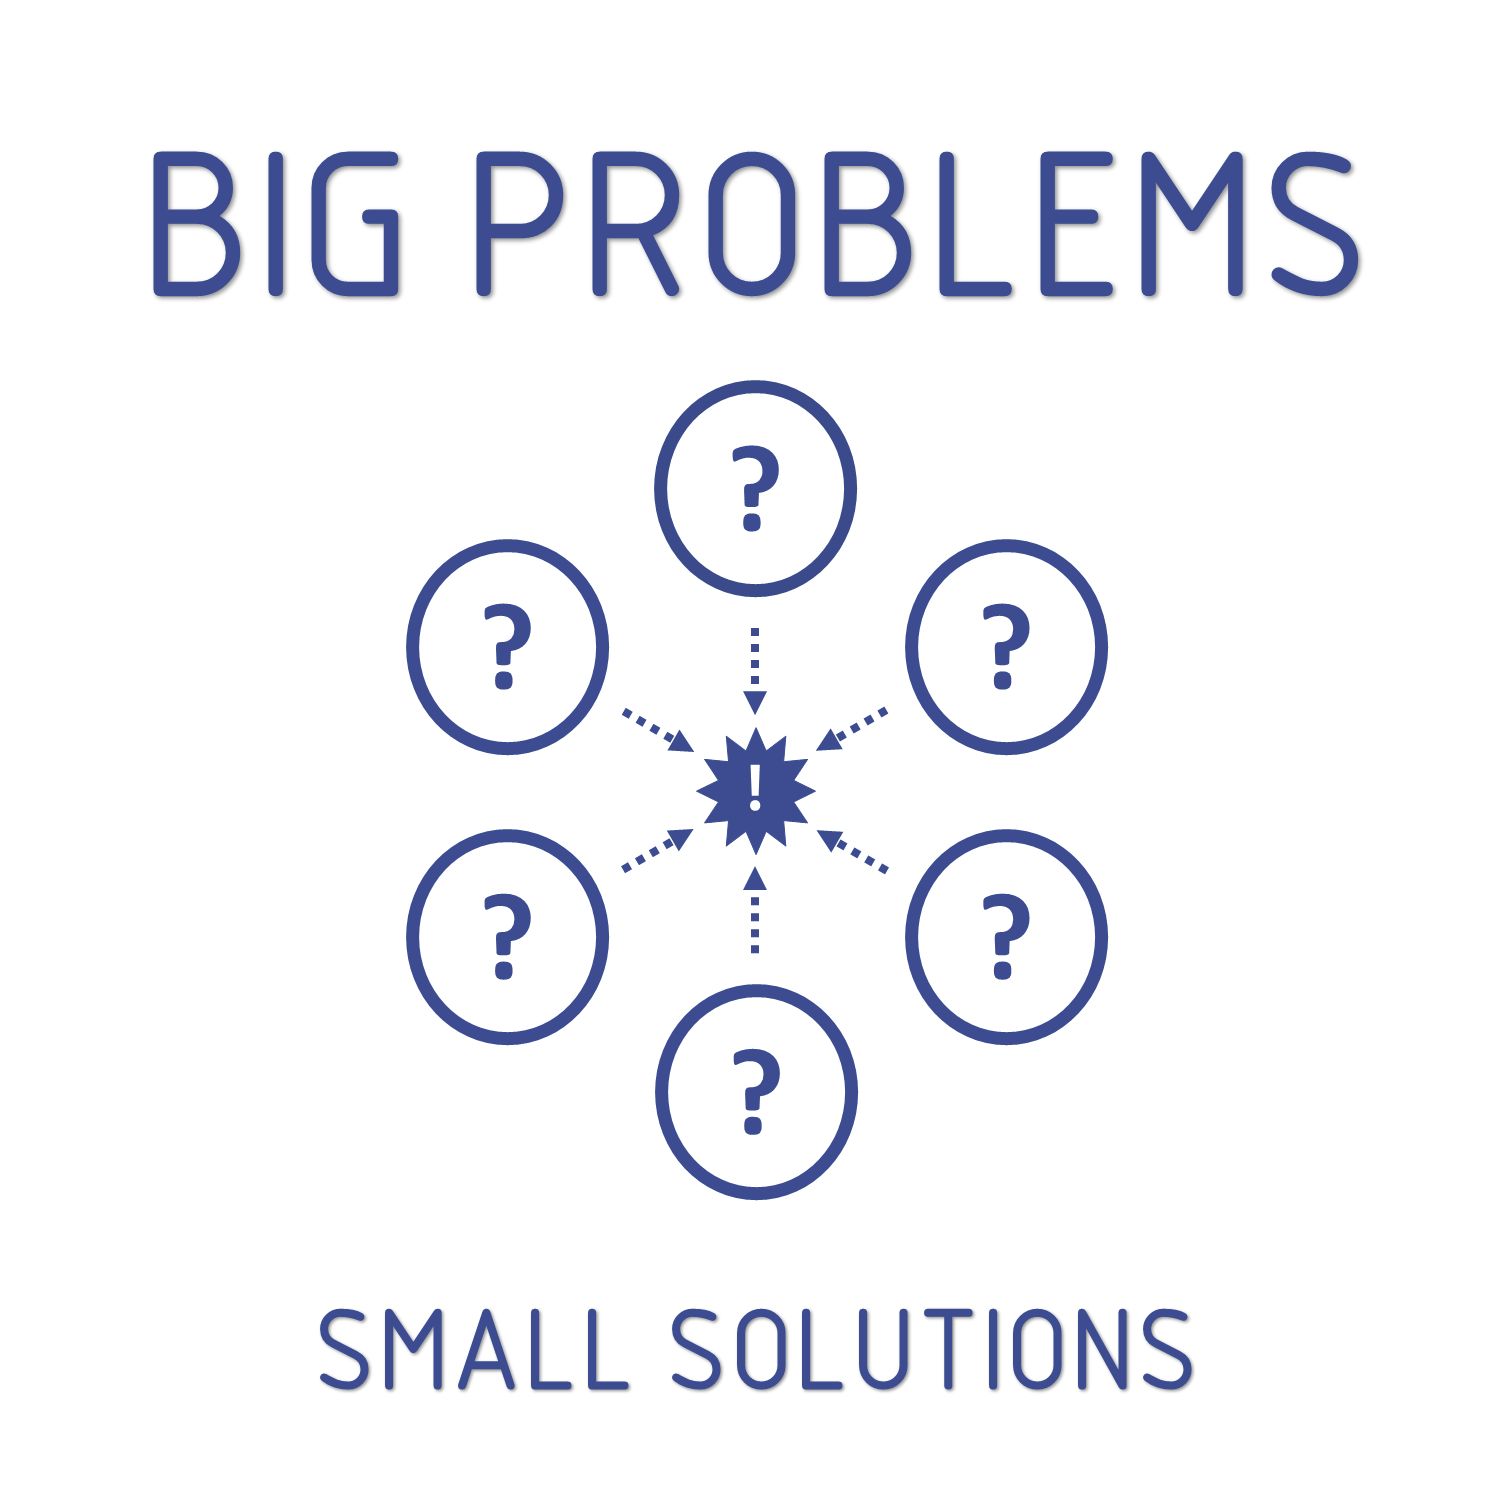 Big Problems, Small Solutions